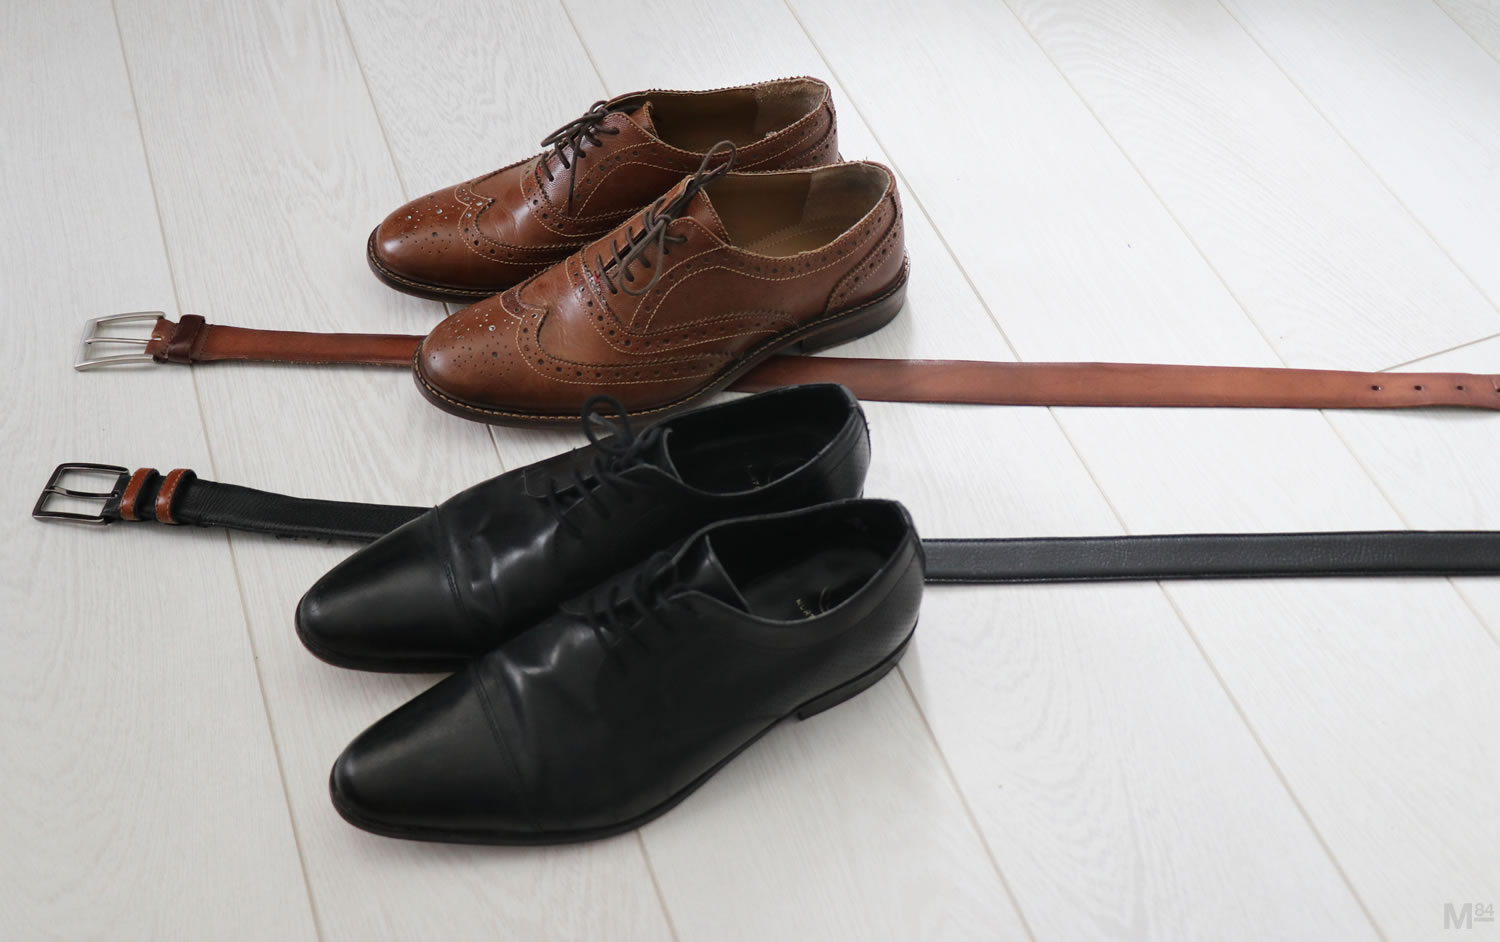 Matching Your Belt And Shoes — The Right Way